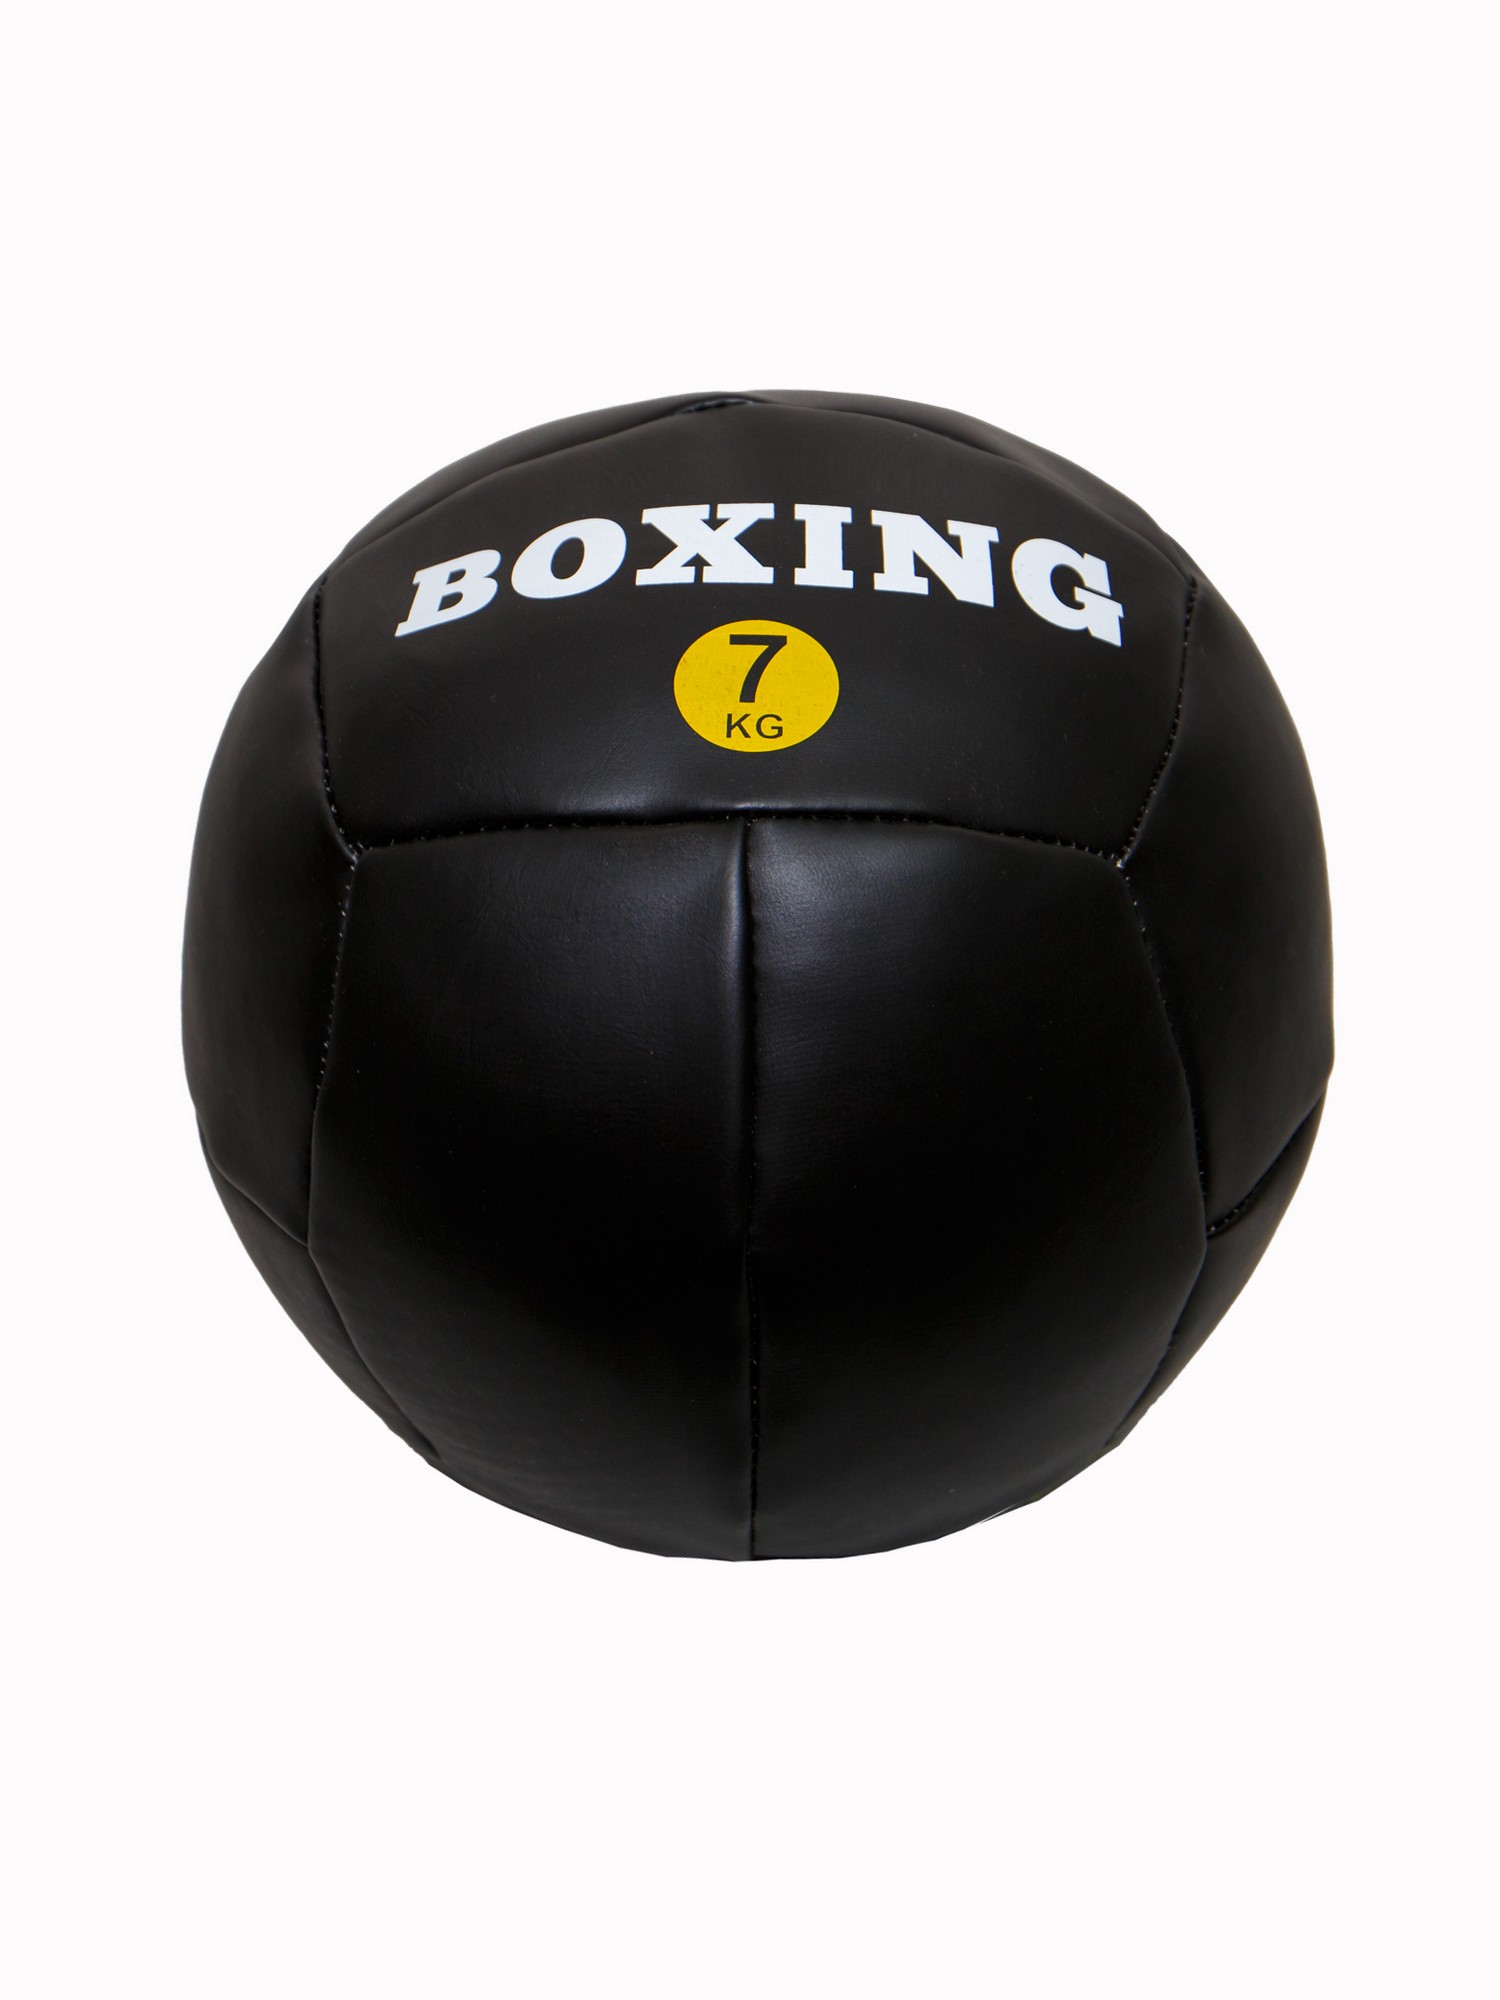 Медицинбол 7кг Totalbox Boxing МДИБ-7 1500_2000